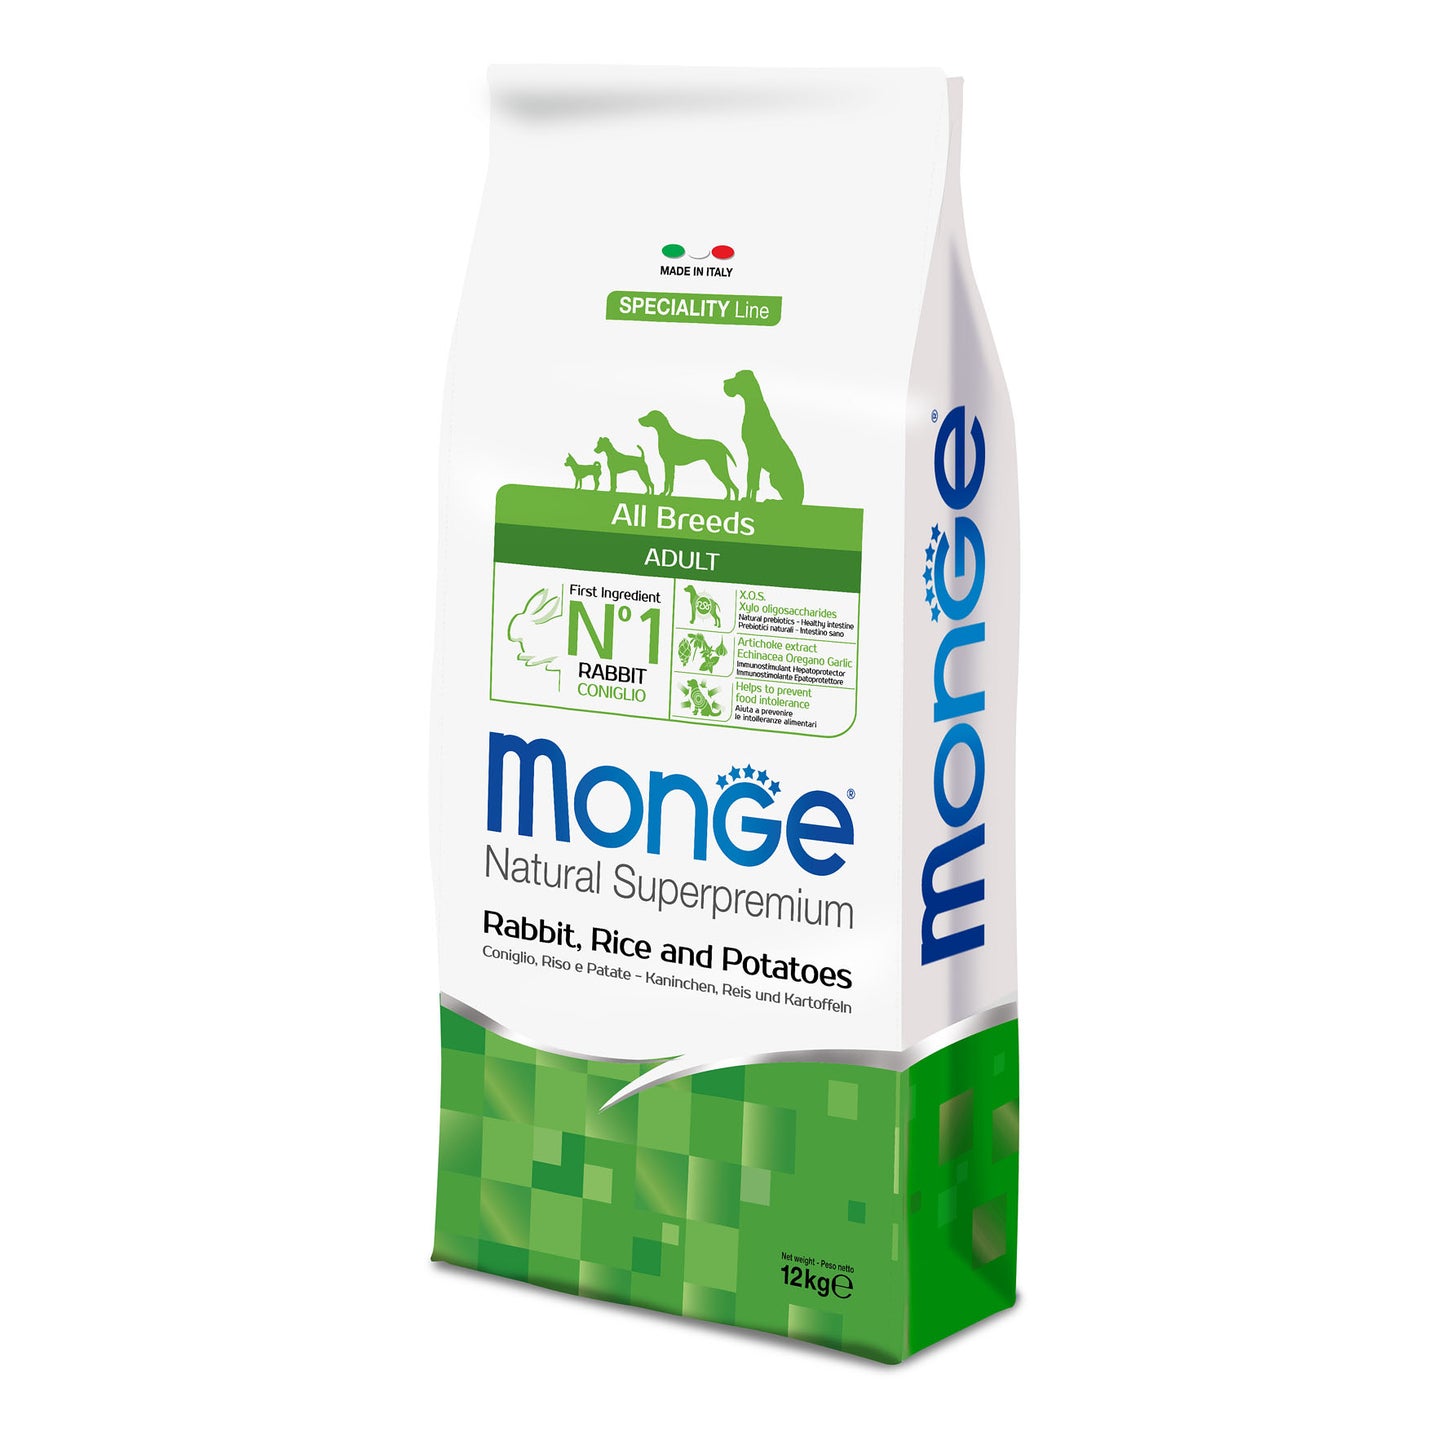 Monge Dog - SPECIALITY Line - Monoprotein - Adult ALL BREEDS Rabbit